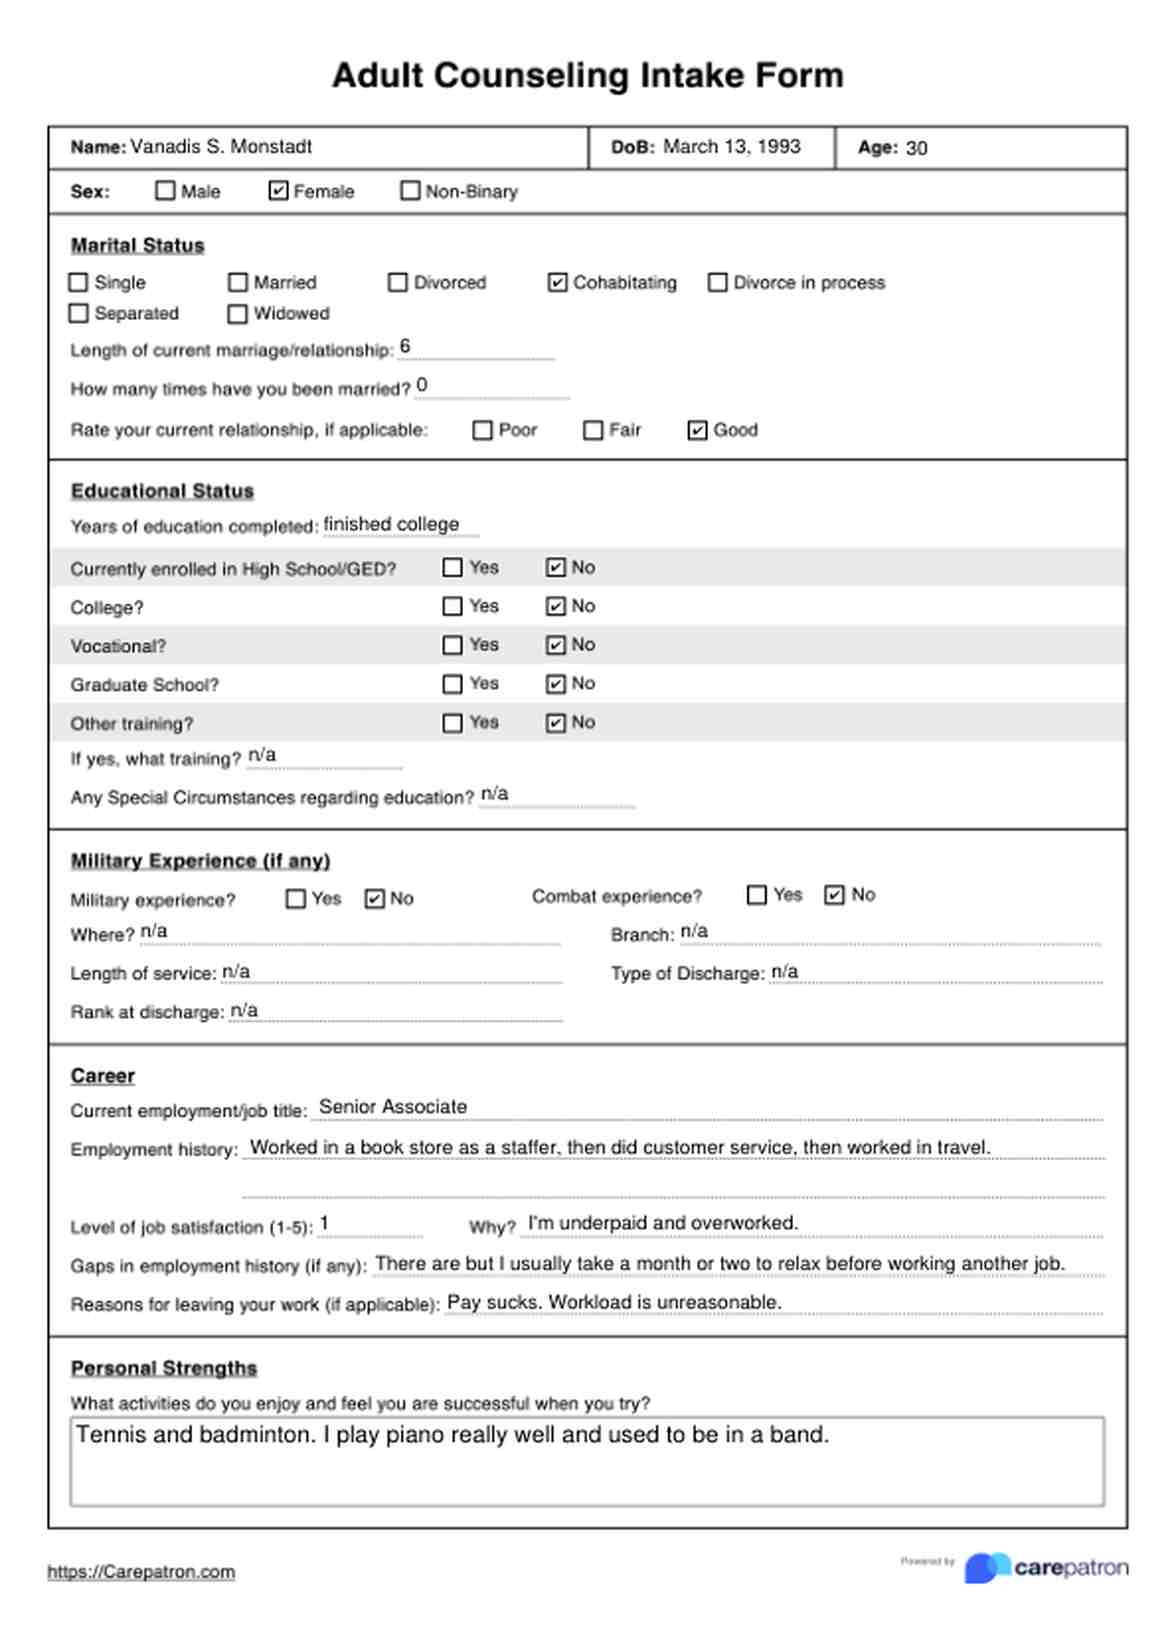 Adult Counseling Intake Form PDF Example